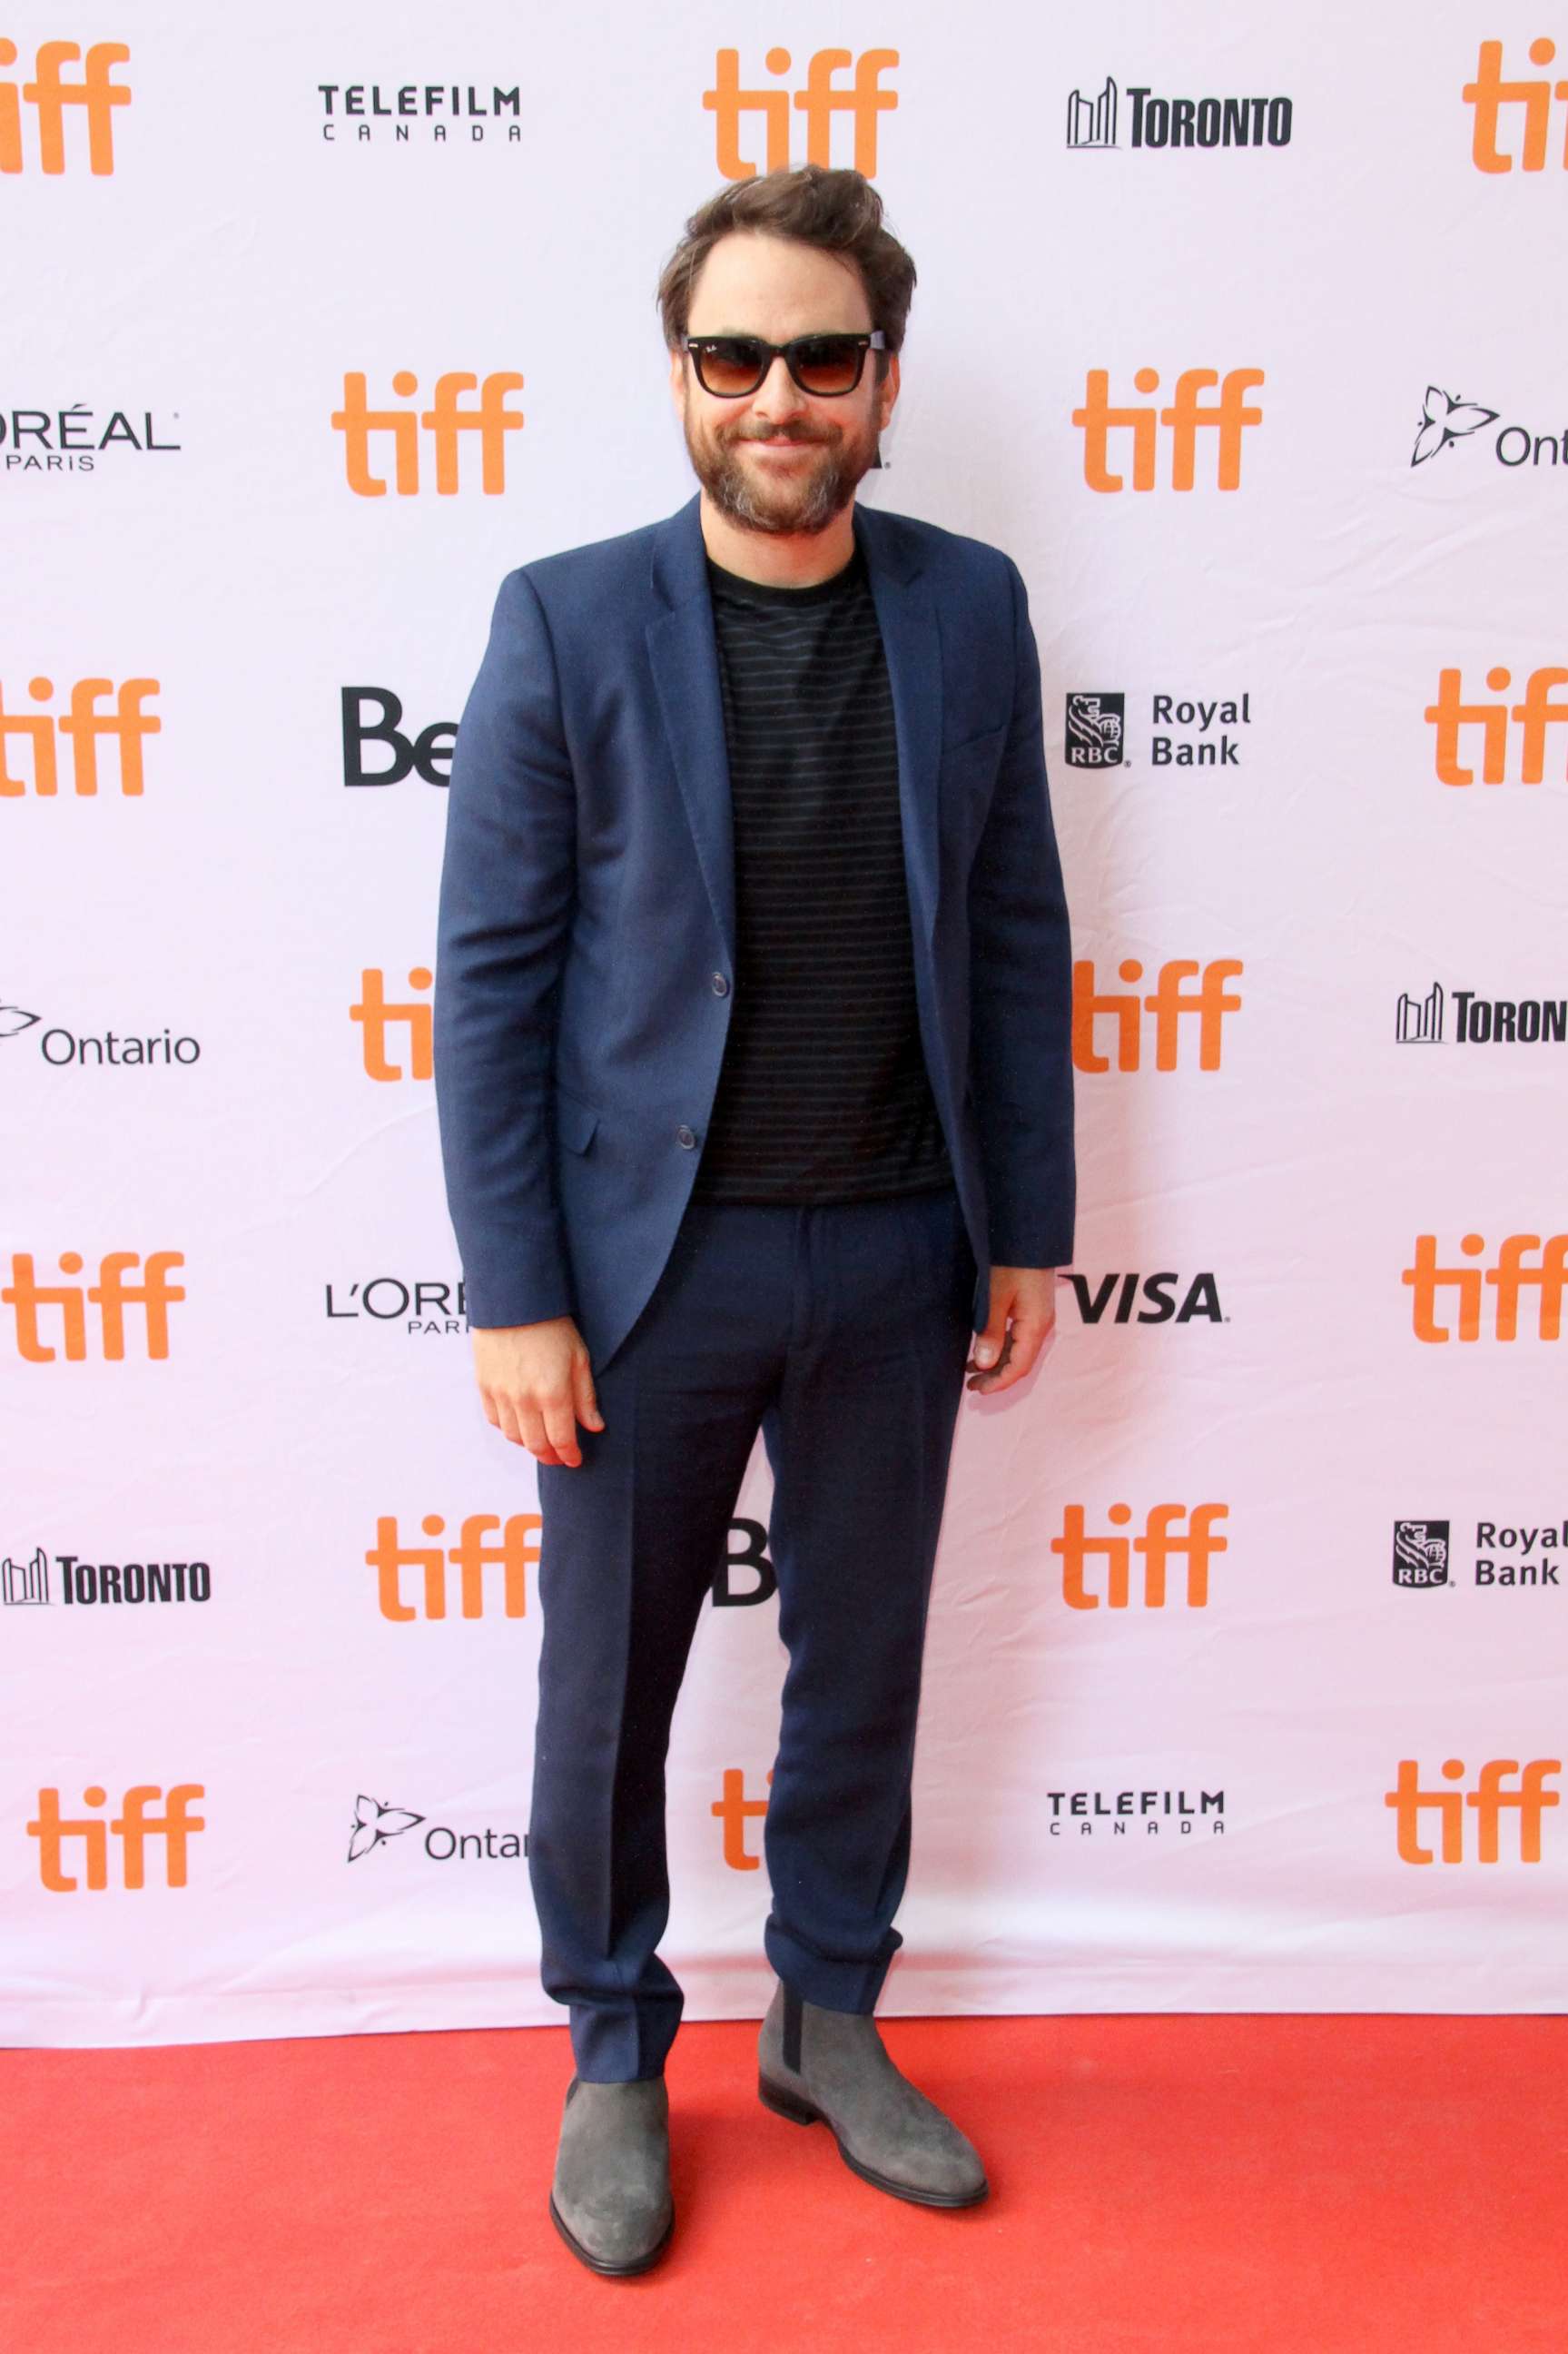 PHOTO: Charlie Day attends the "I Love You Daddy" premiere during the 2017 Toronto International Film Festival at Ryerson Theater, Sept. 9, 2017 in Toronto.